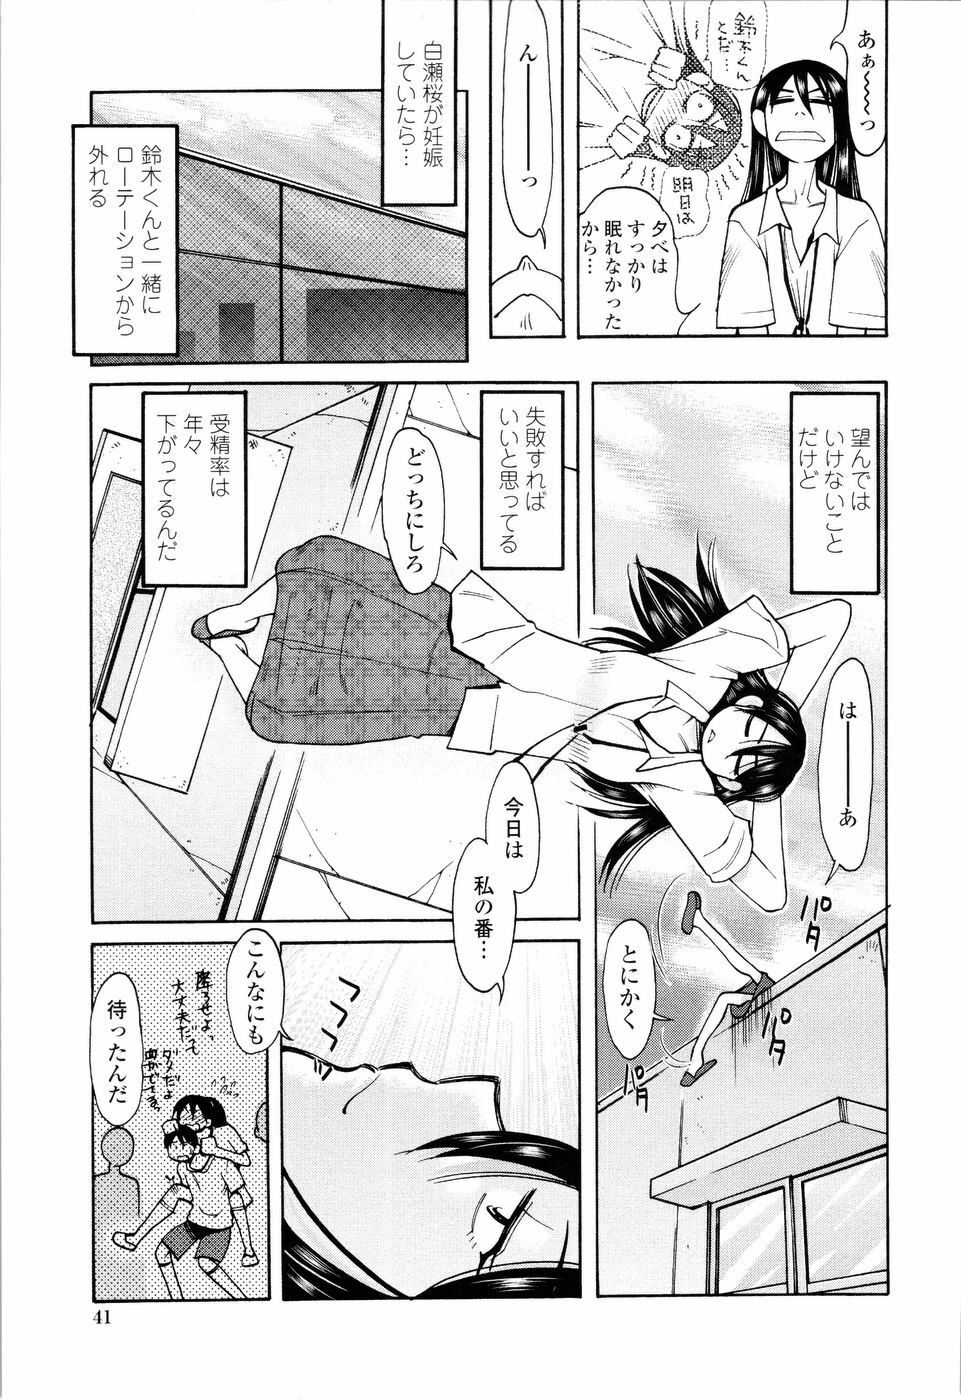 [Ono Kenuji] Love Dere - It is crazy about love. page 43 full